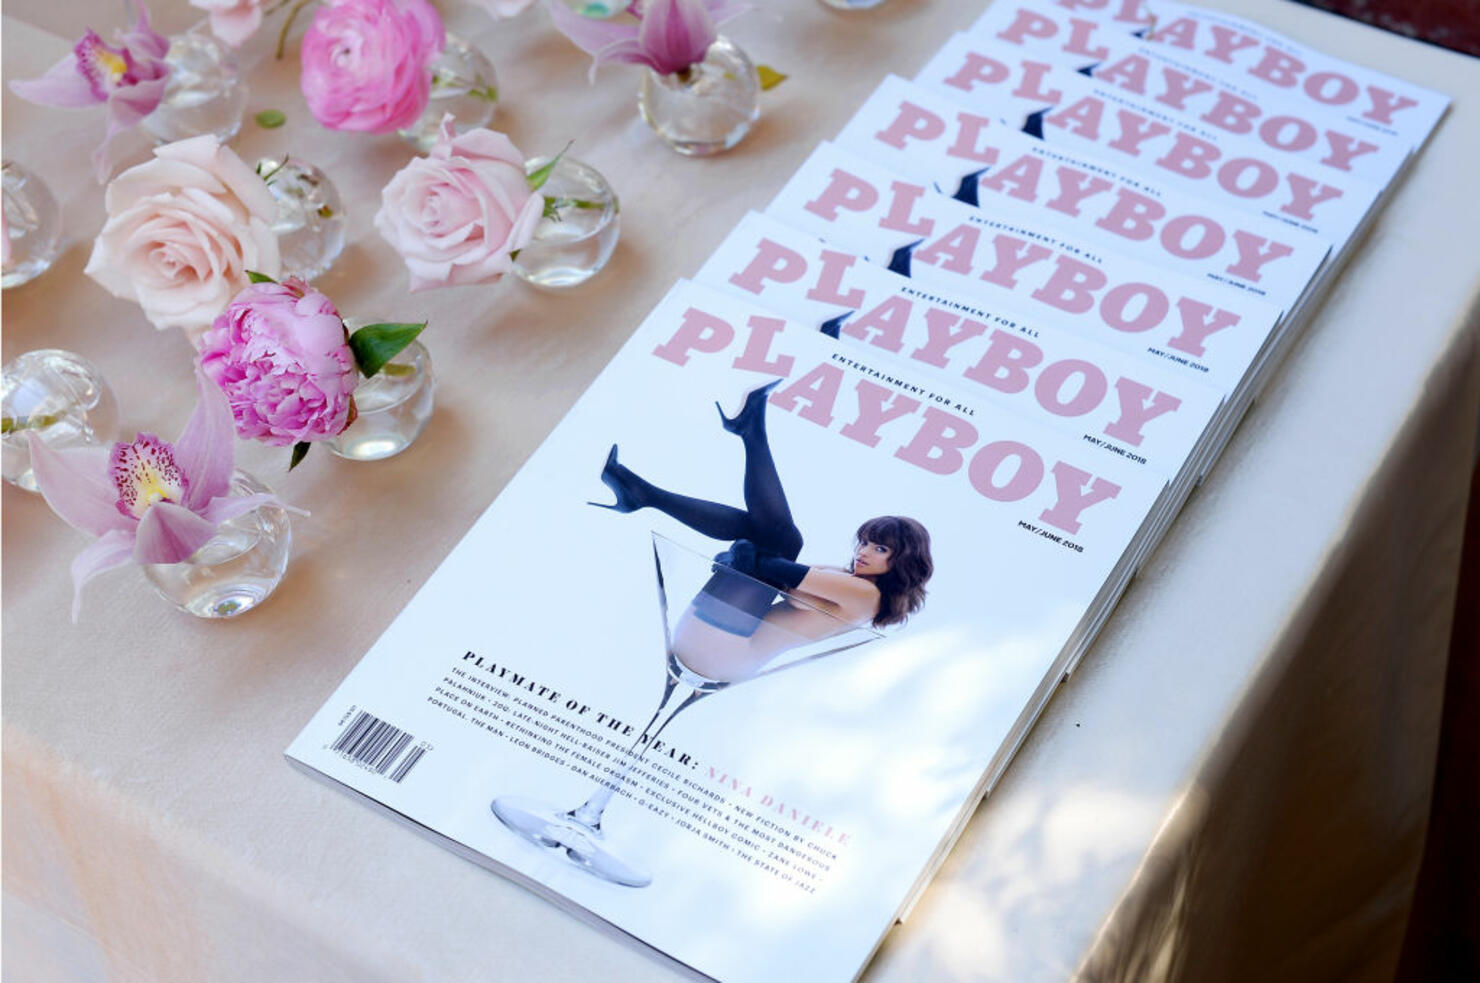 Playboy Says It's Time for the Boys to Feel Sexy With Its New